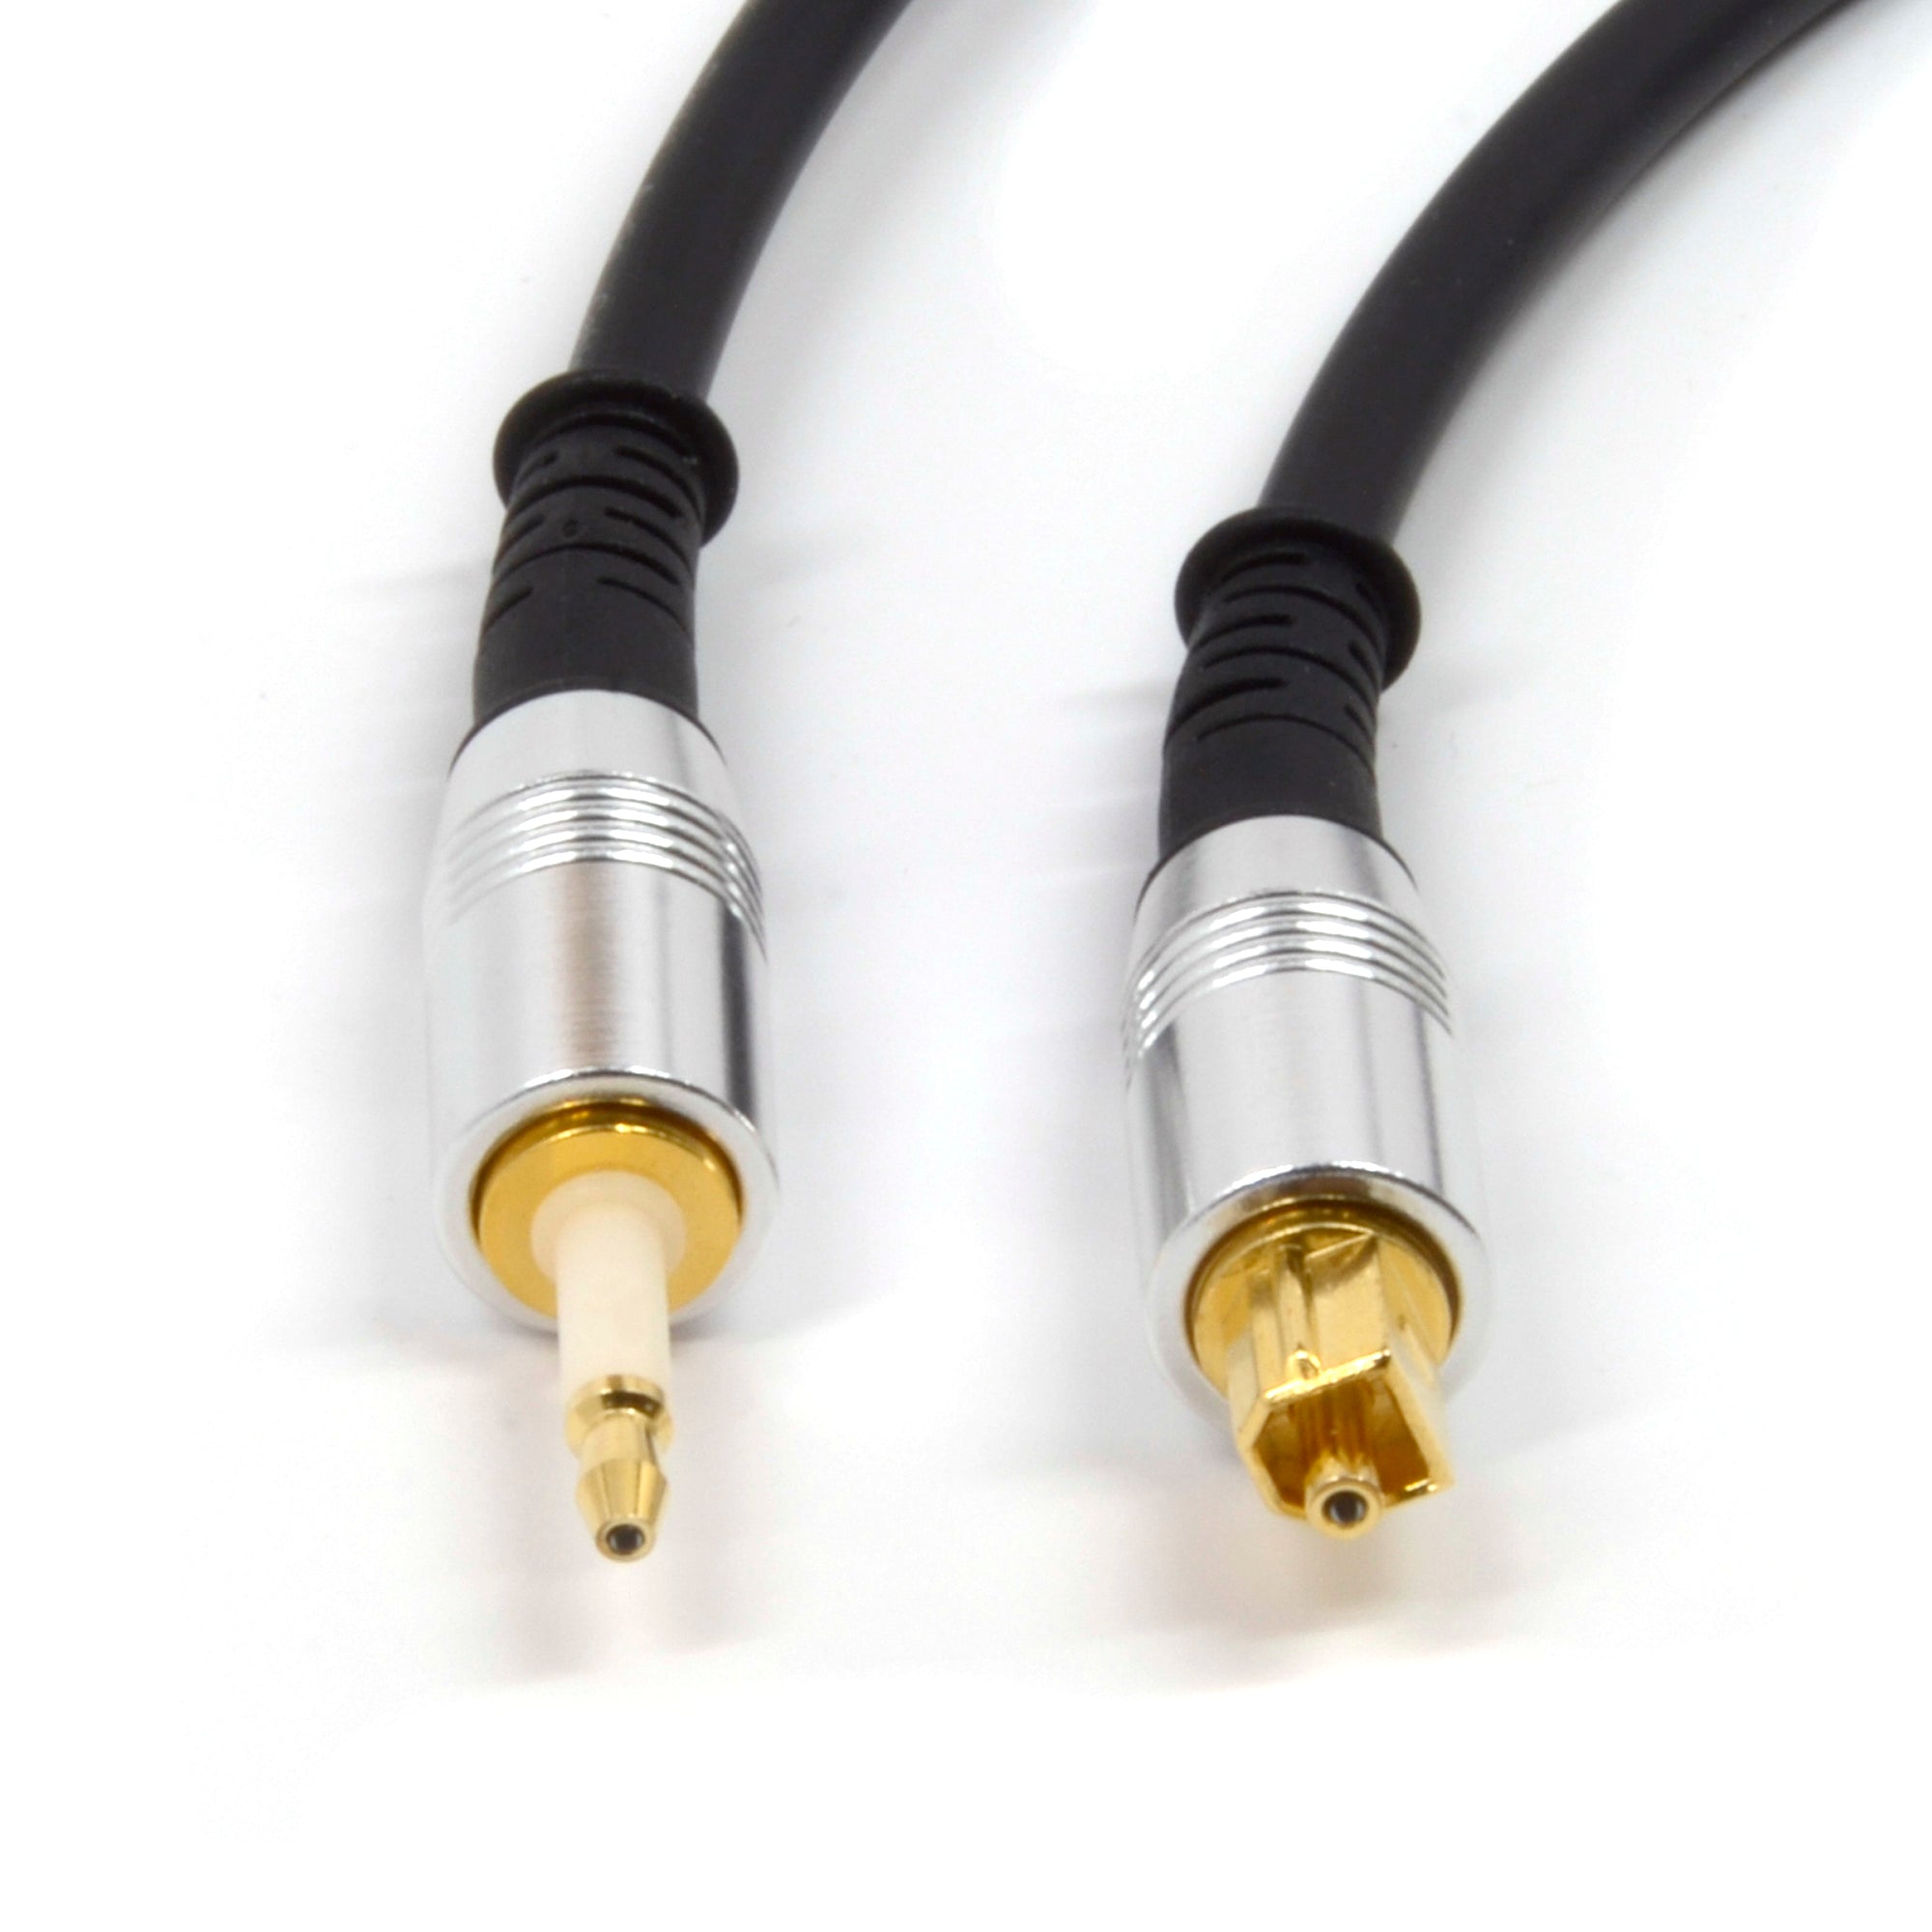 Benchmark RCA to RCA Coaxial Cable for Digital Audio, Analog Audio, or -  Benchmark Media Systems